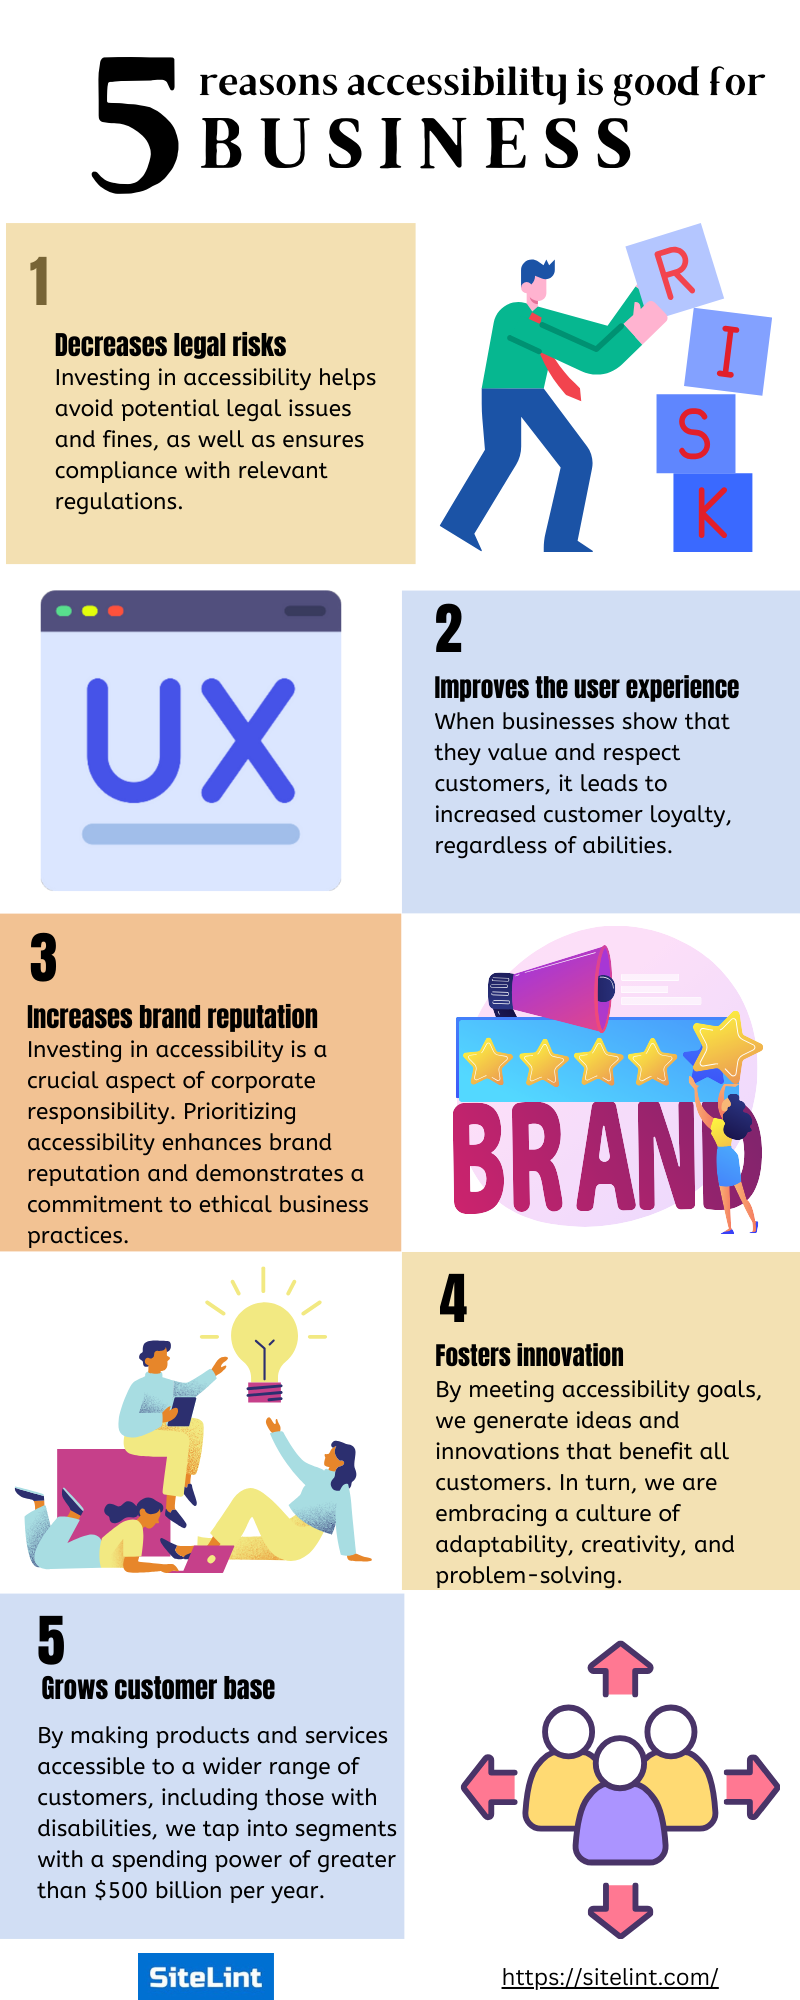 An infographic titled "5 reasons accessibility is good for BUSINESS" with colorful illustrations and text blocks. 1. Decreases legal risks: A figure stacking letter blocks to spell "RISK" illustrating how accessibility reduces legal issues. 2. Improves the user experience: An icon representing a user interface with a "UX" design. 3. Increases brand reputation: A star rating system and a person holding a magnifying glass over the word "BRAND". 4. Fosters innovation: Two people, one holding a light bulb, the other reaching towards it, symbolizing the sharing of ideas. 5. Grows customer base: Icons of people with arrows, indicating an expansion of the customer base. The bottom of the infographic includes the URL "https://sitelint.com/" for more information.